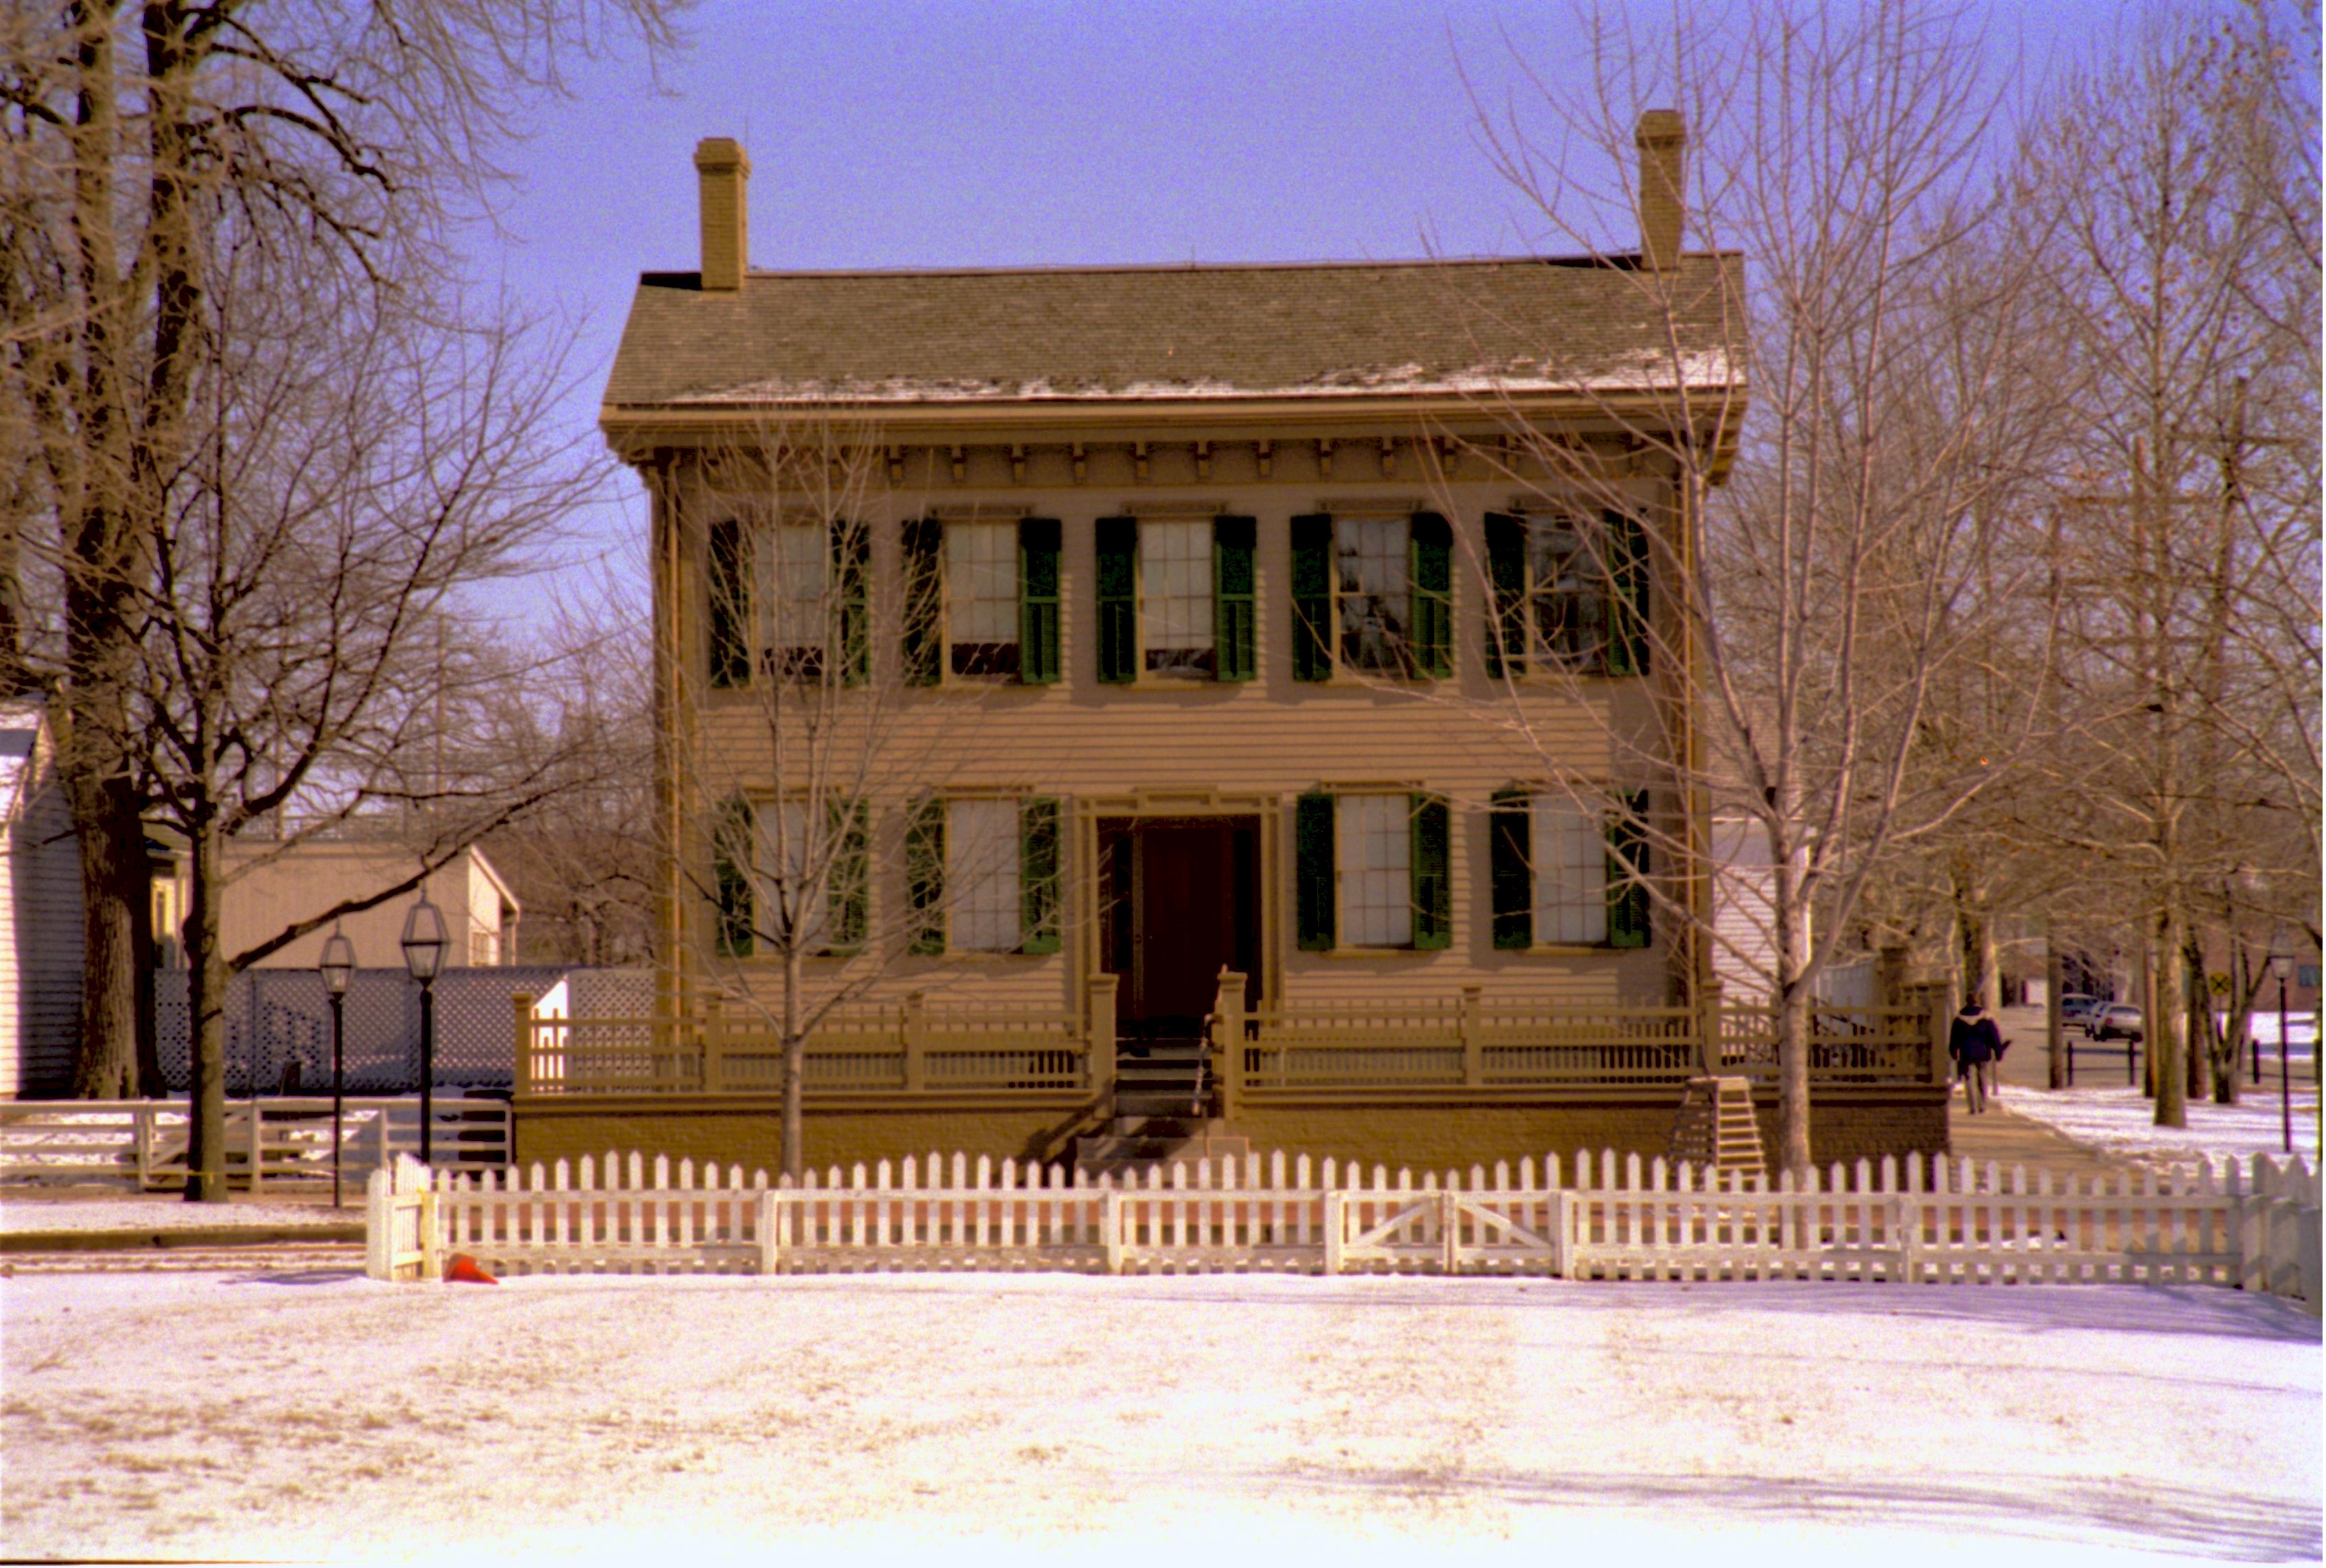 Lincoln Home in winter, snow in foreground on Burch and Brown lots. B-2 in background on left, Corneau House on far left. Visitors walk on boardwalk on side of Lincoln Home on right. Lincoln Barn visible in background behind Home. Looking East from Burch lot, Block 7, Lot 9 snow, Lincoln Home, Corneau, B-2, Lincoln Barn, Burch Lot, Brown Lot, visitors